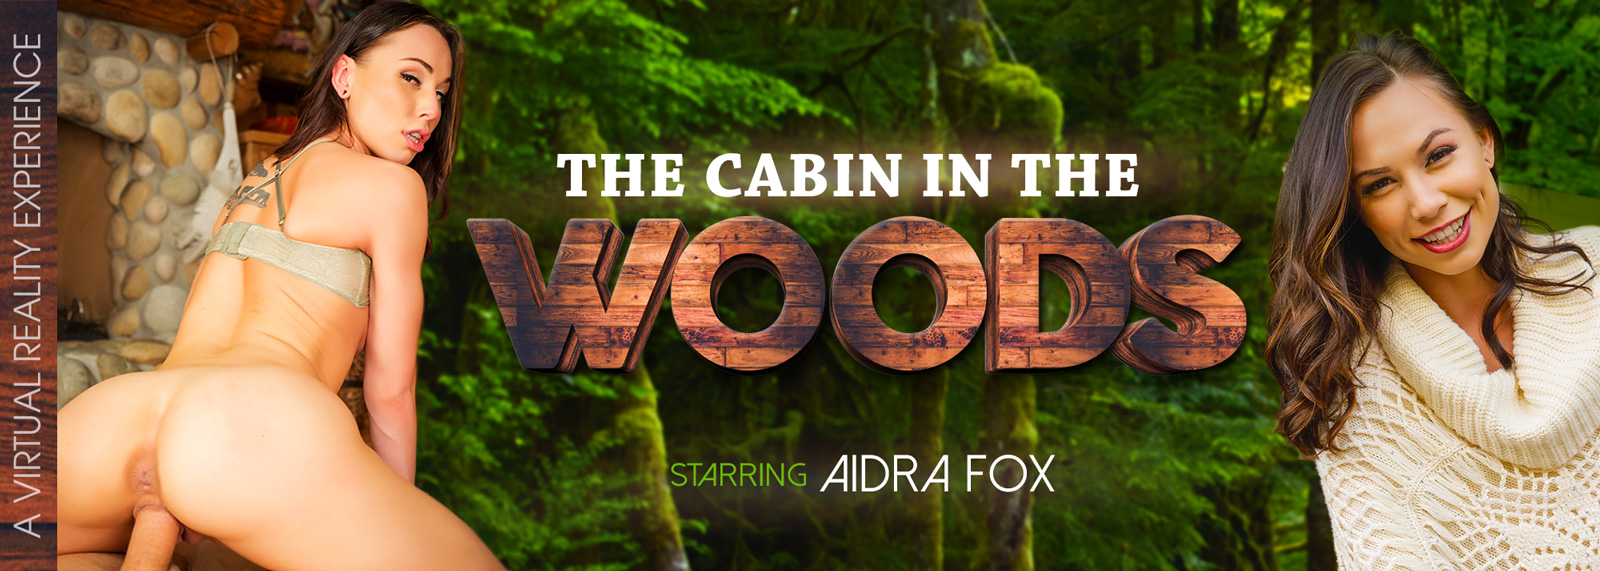 The Cabin in the Woods VR Porn